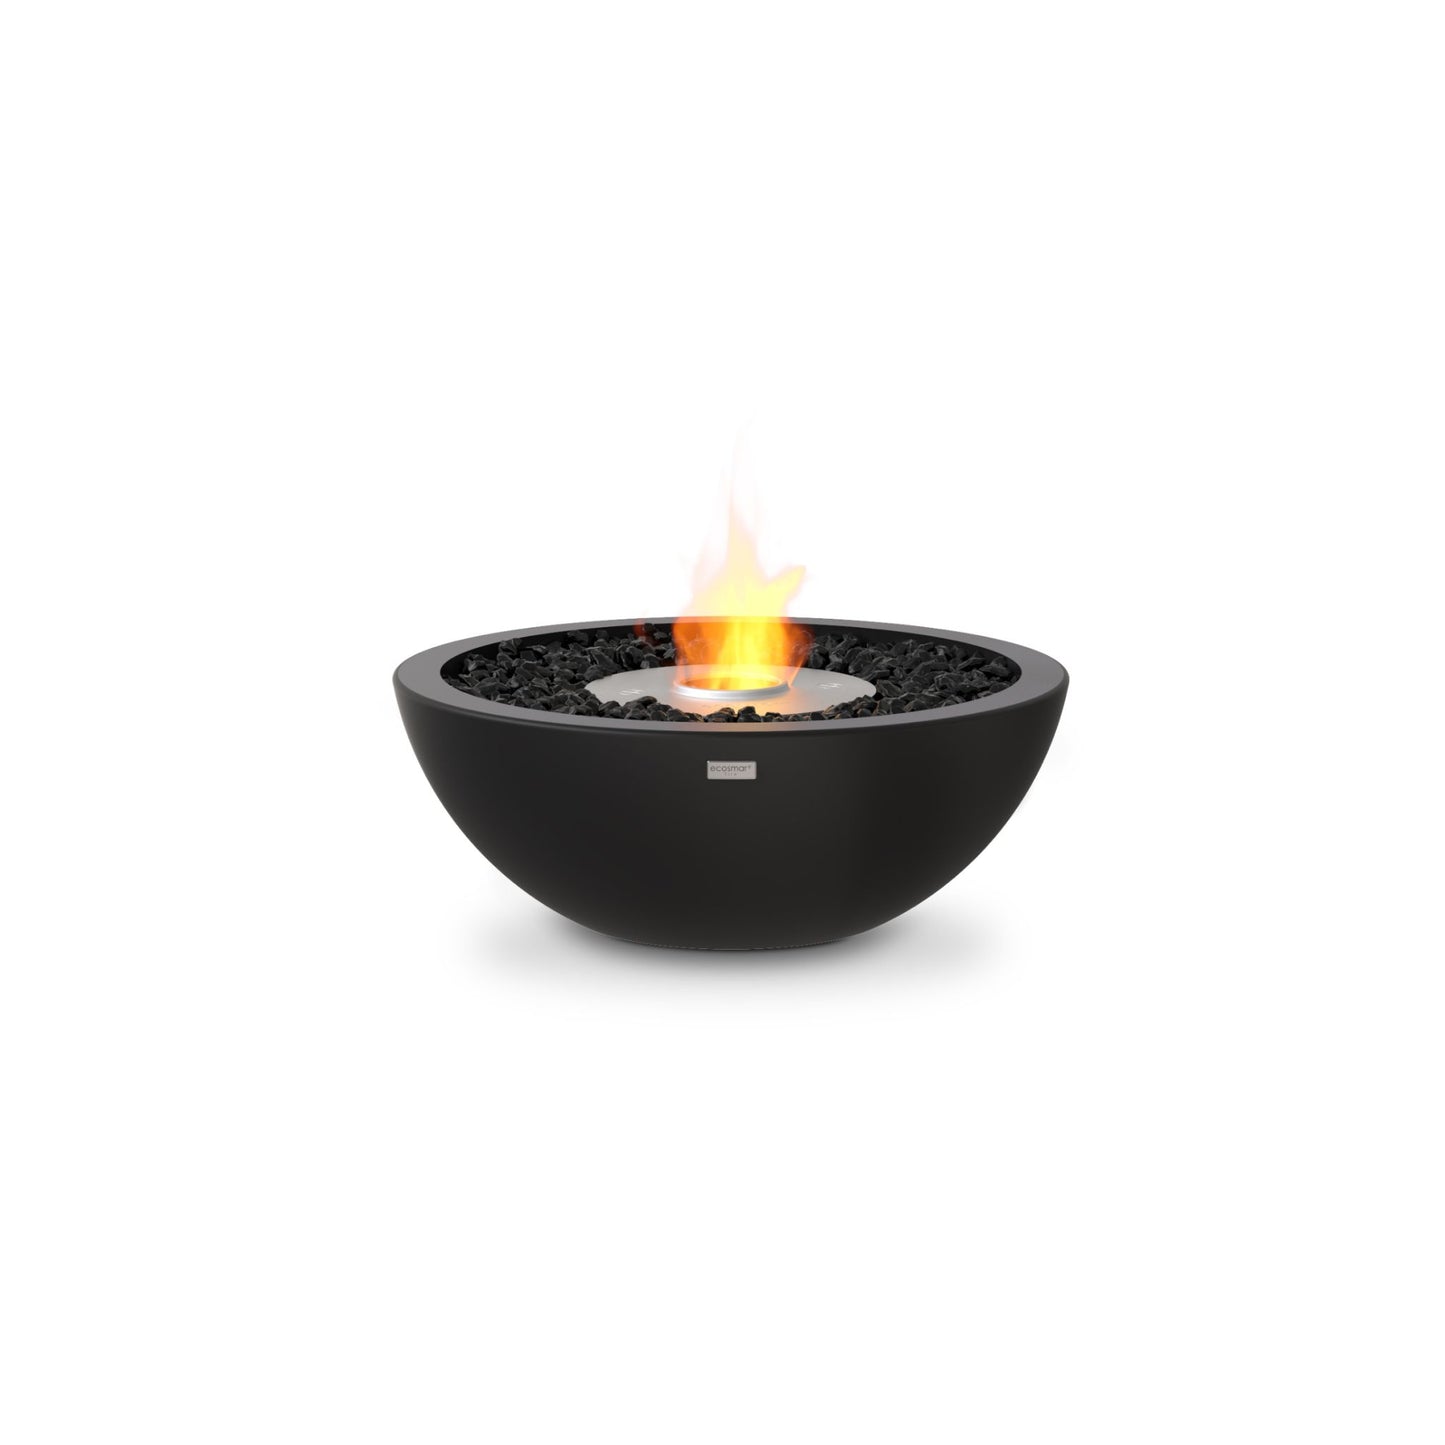 Ecosmart Fire Mix 600 bioethanol fire pit bowl in black concrete with stainless steel burner on a white background